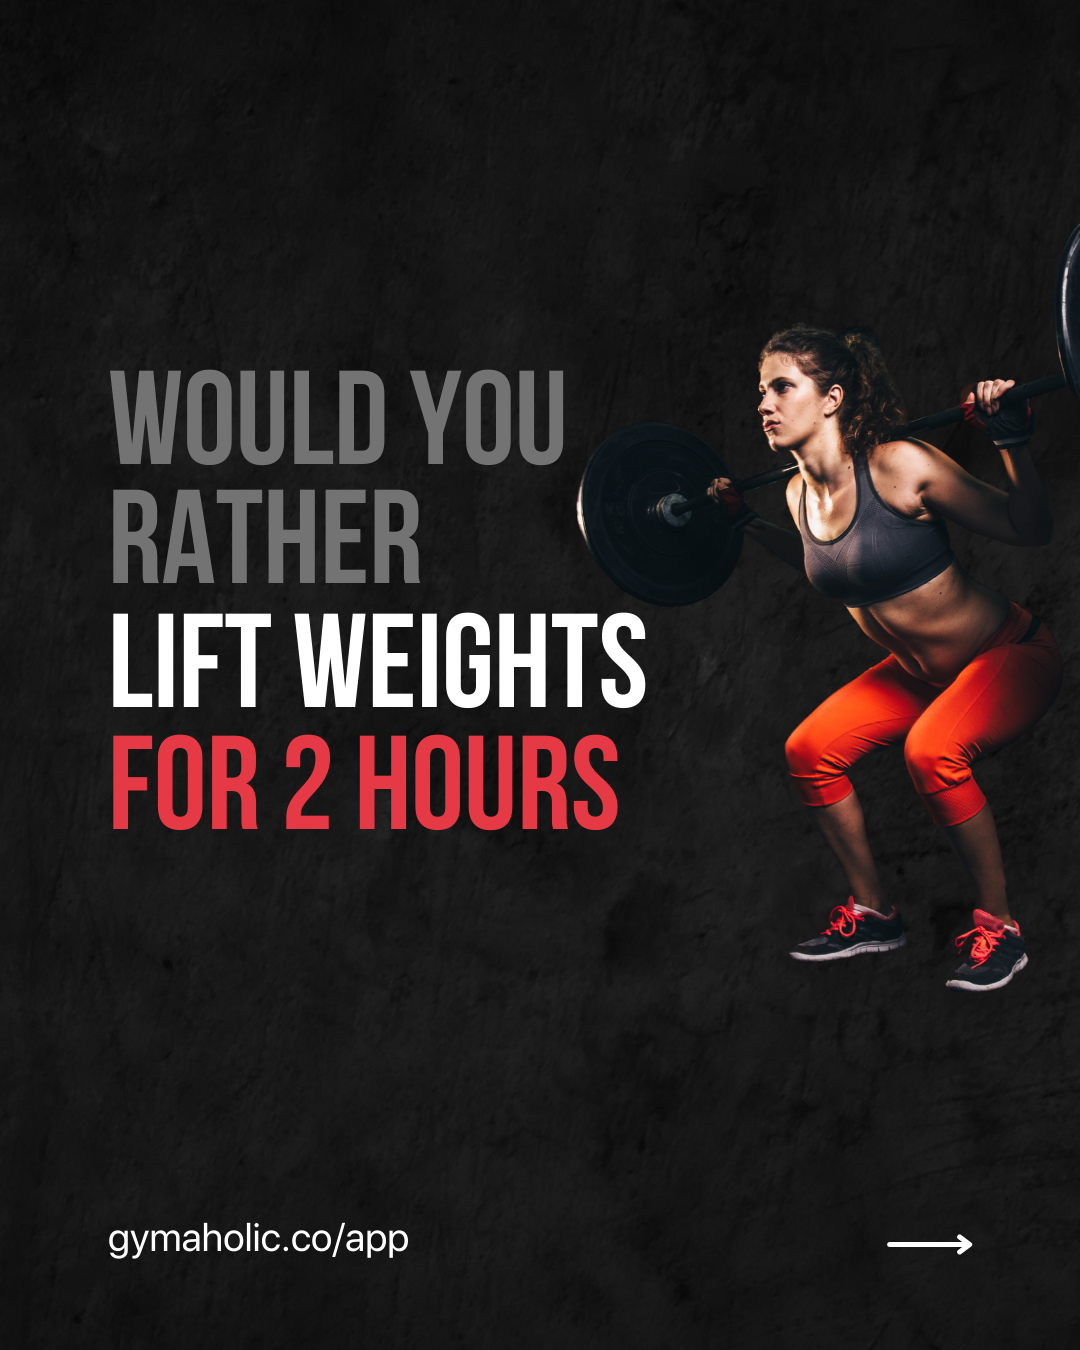 Would you rather lift weights for two hours or do cardio for one hour? The